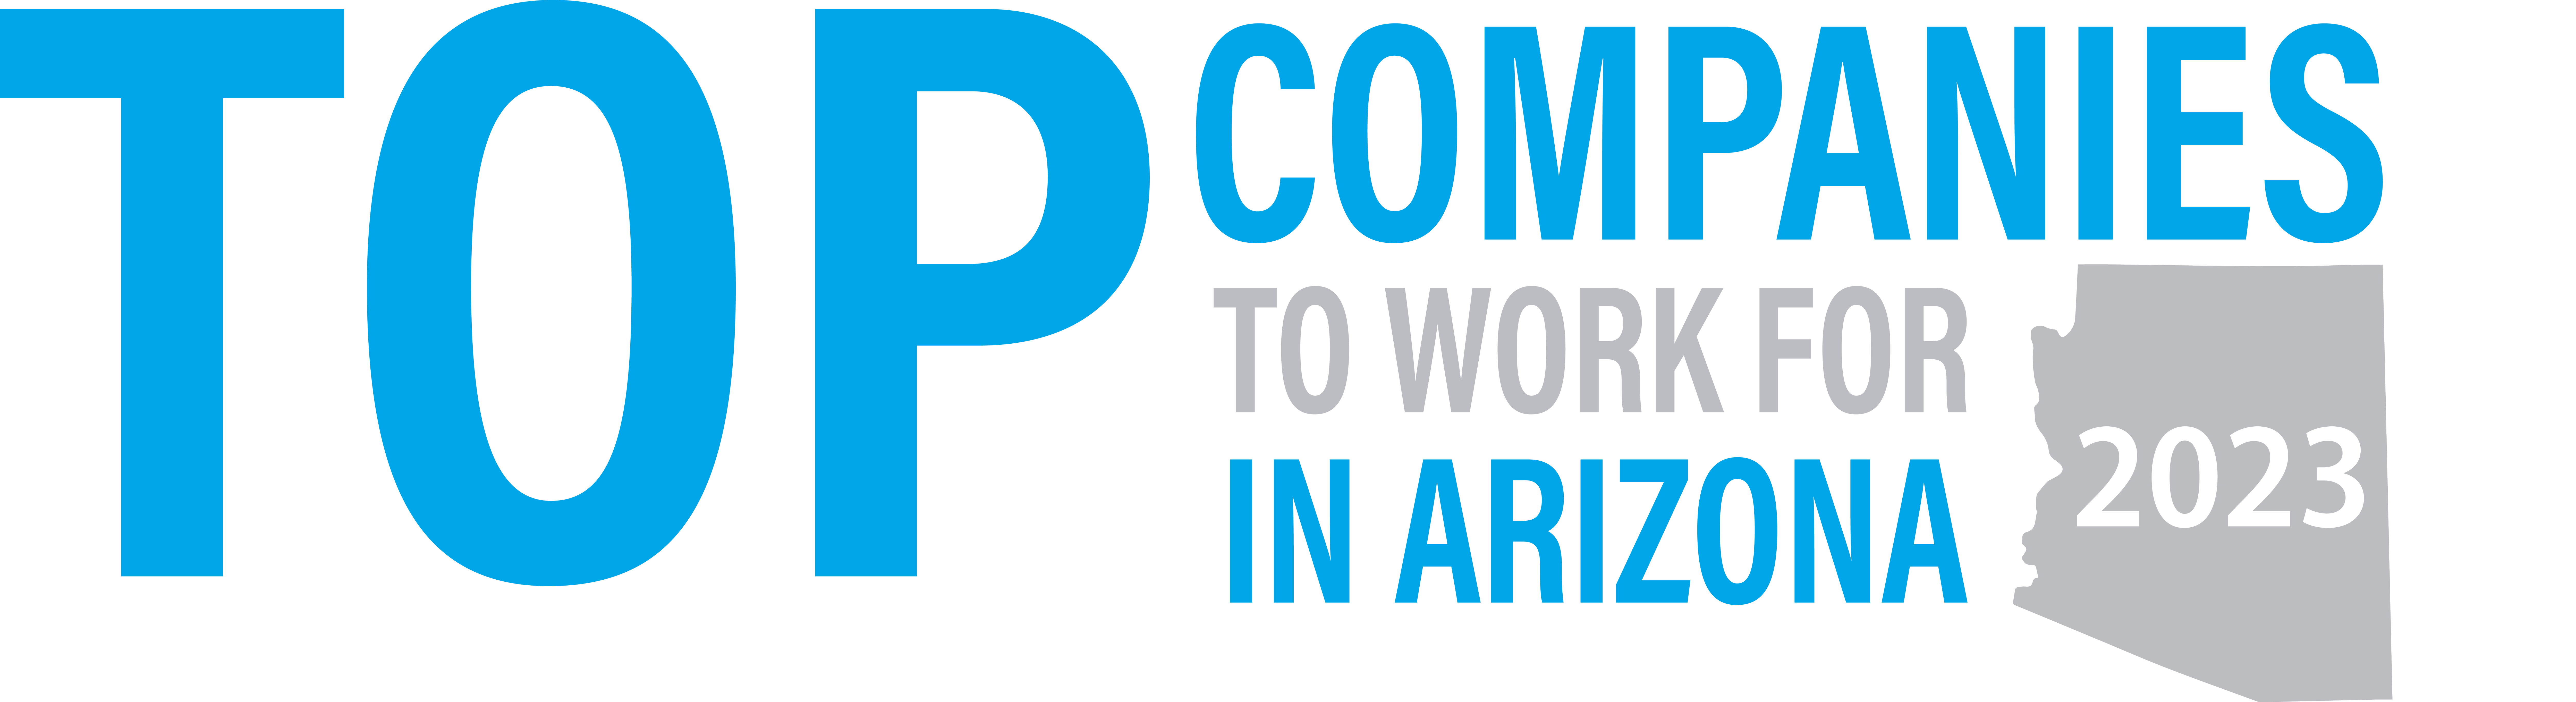 Top Companies to Work for In AZ 2023